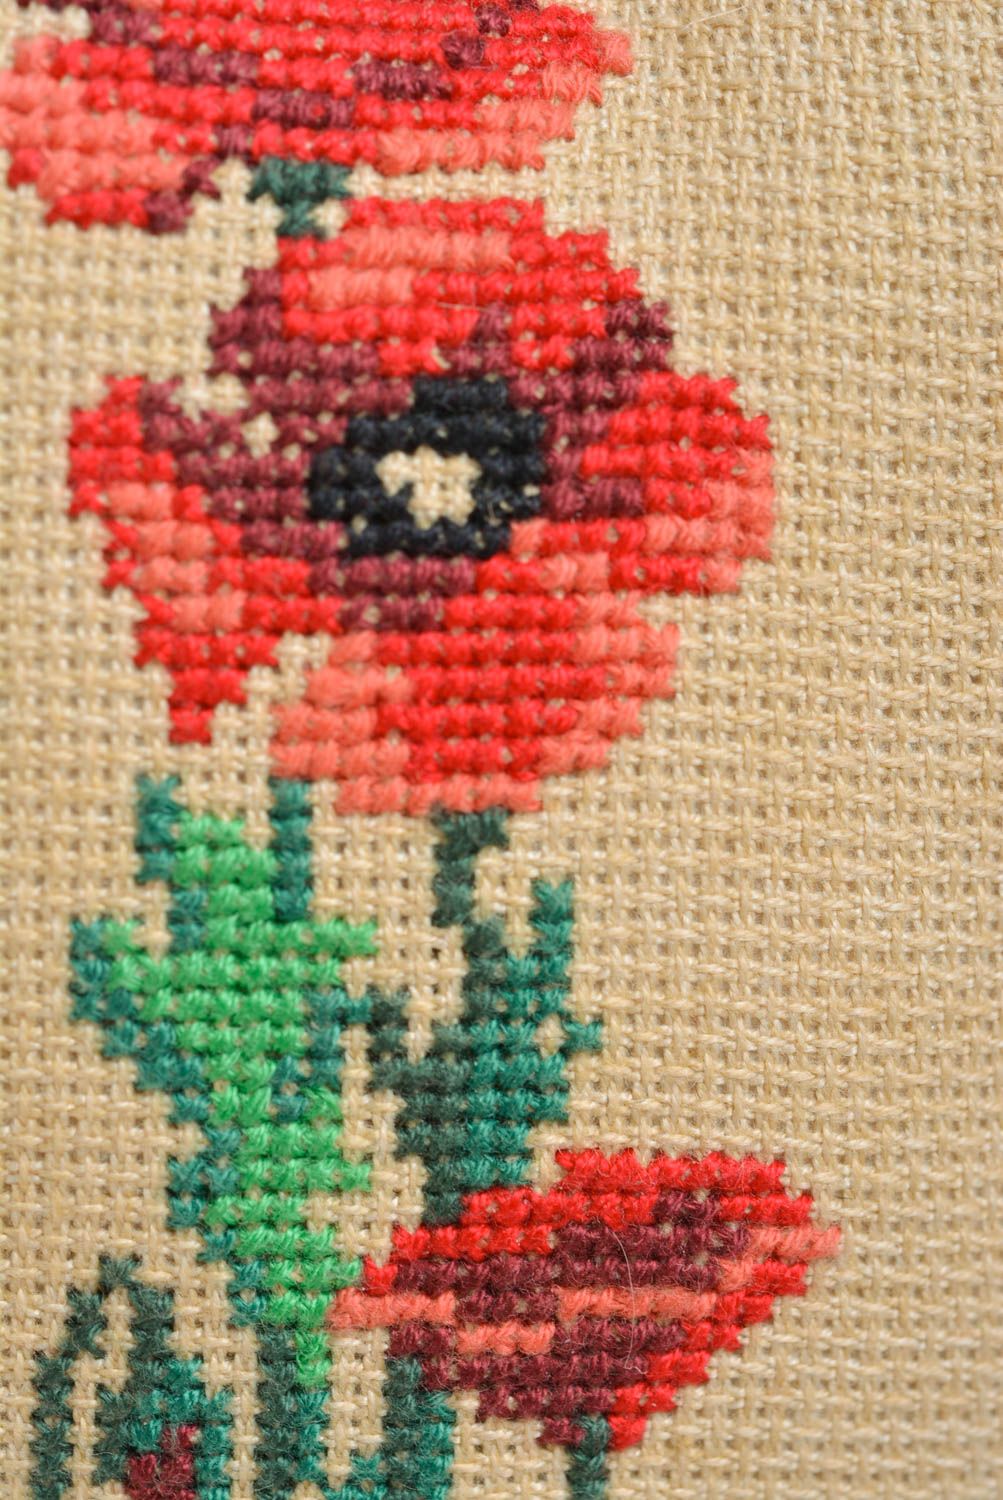 Handmade interior decorative heart-shaped wall hanging with embroidered poppies photo 4